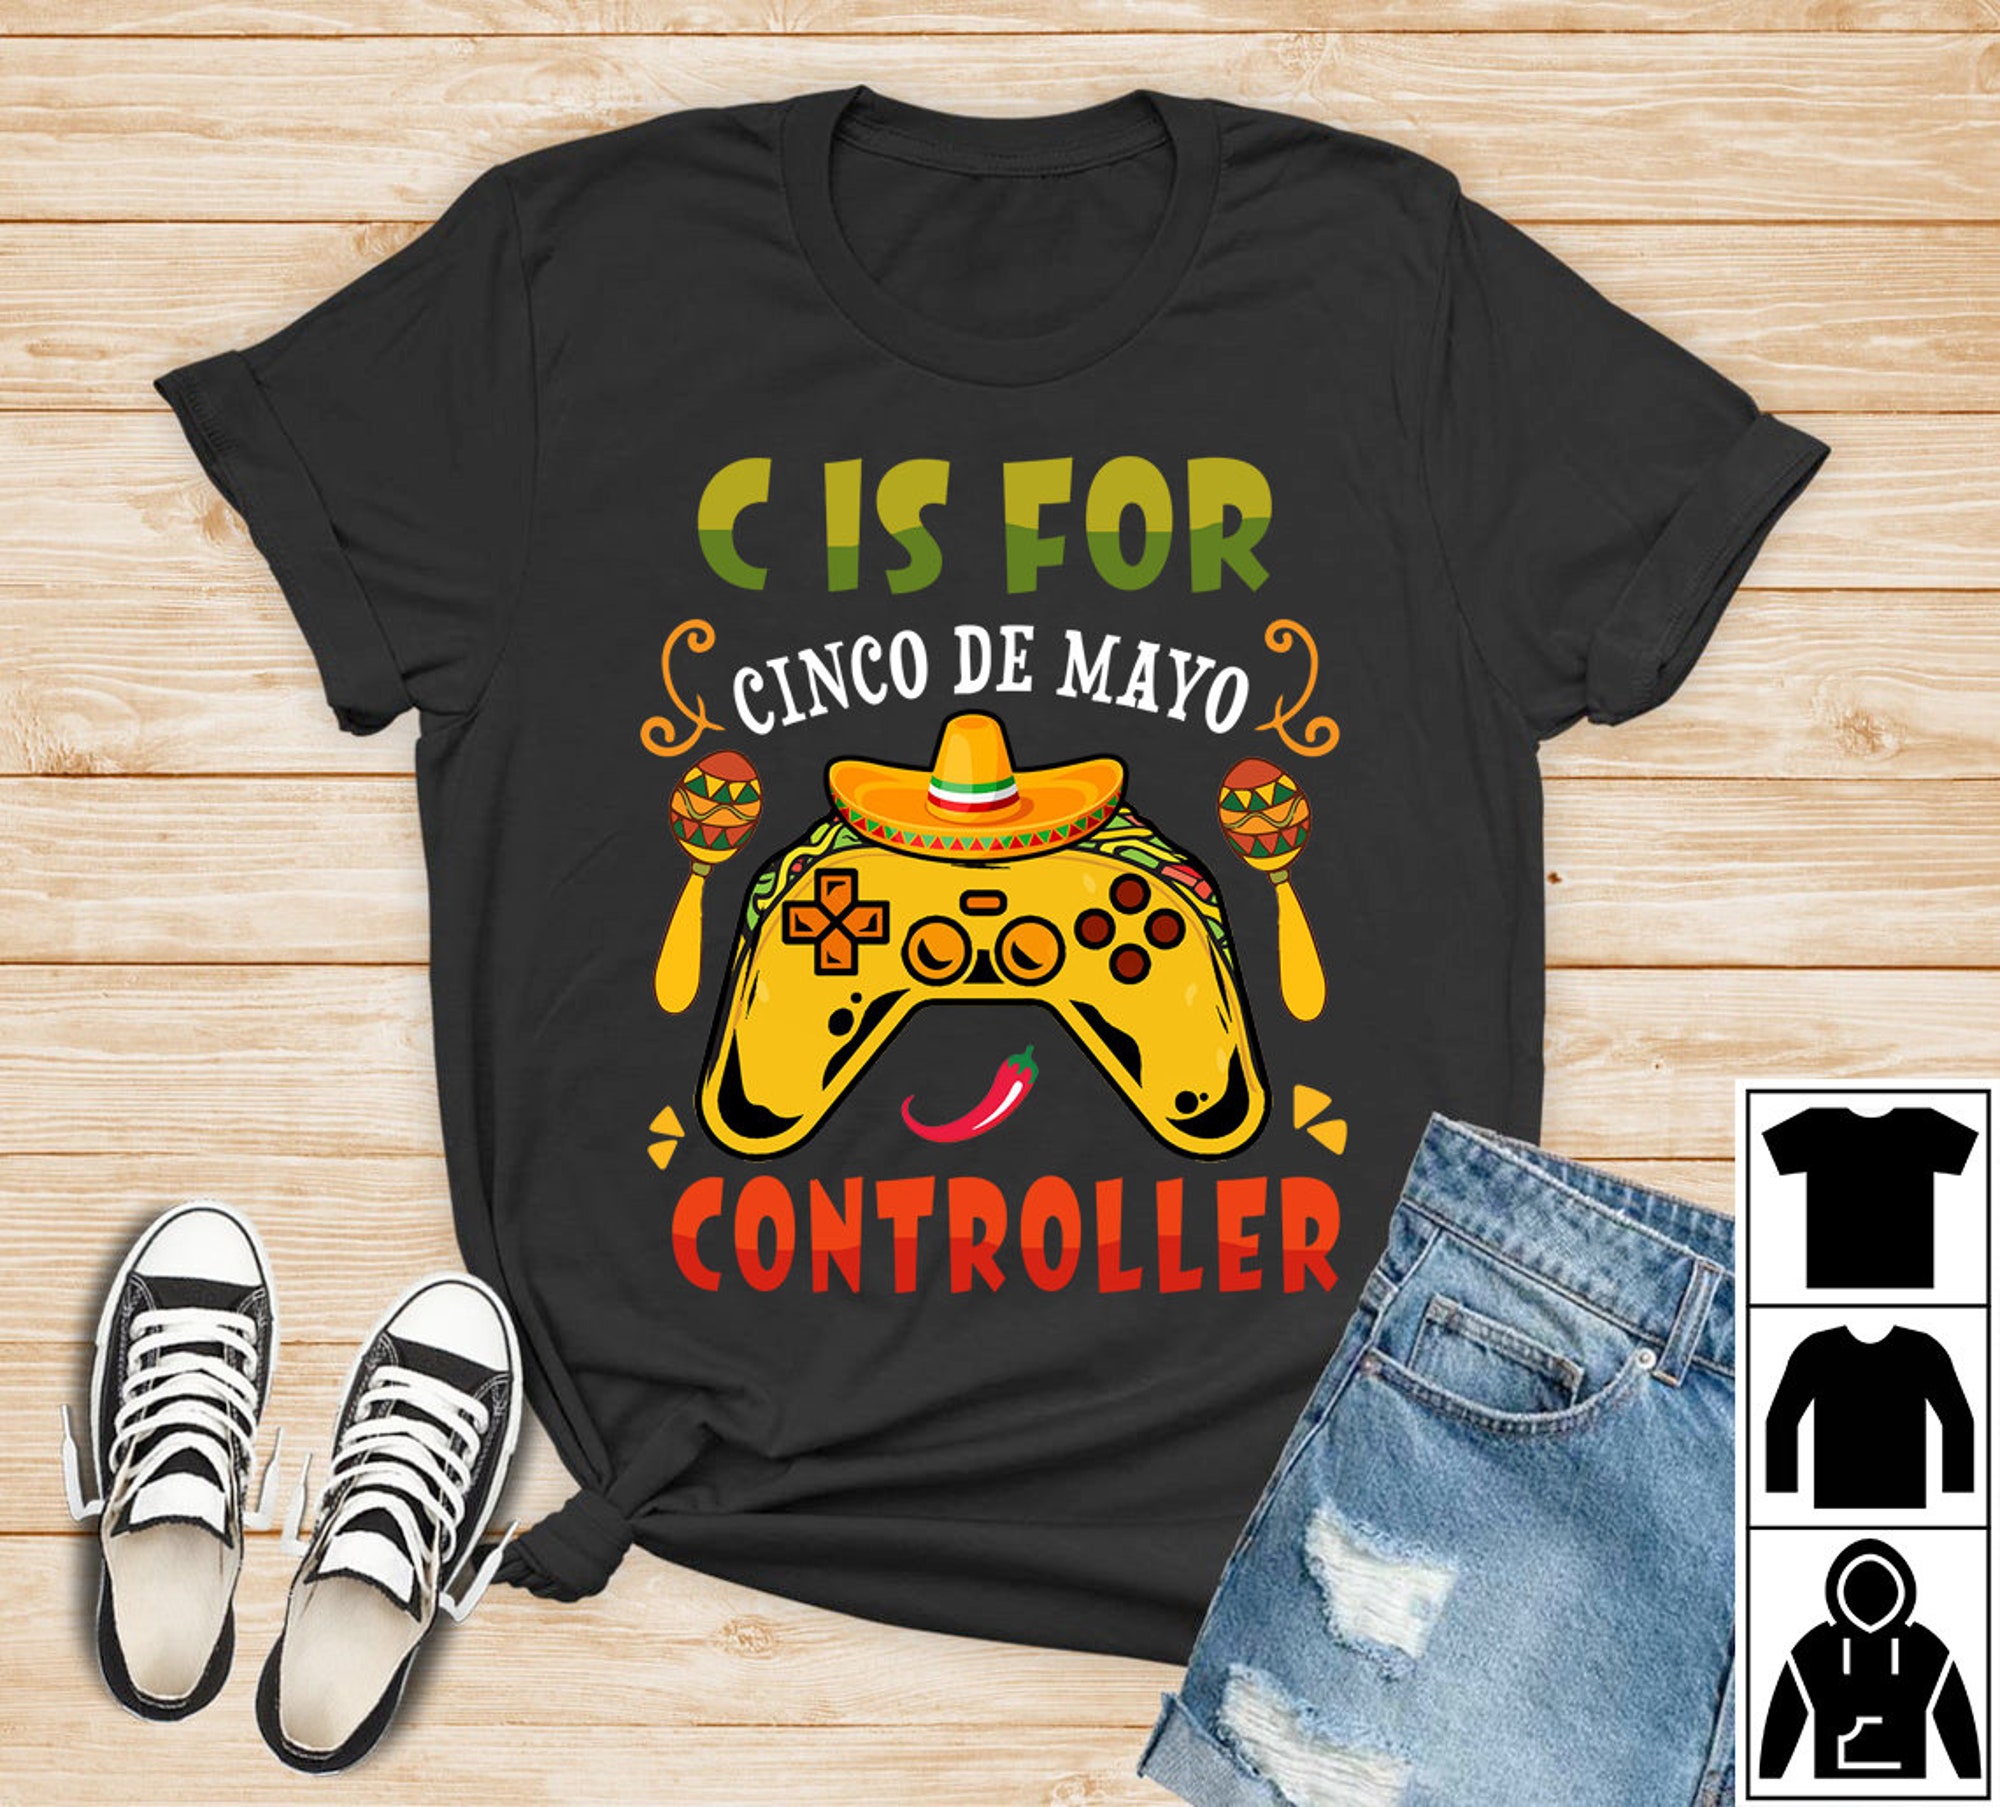 Discover C is For Cinco De Mayo Controller Shirt, Funny Video Game T-Shirt